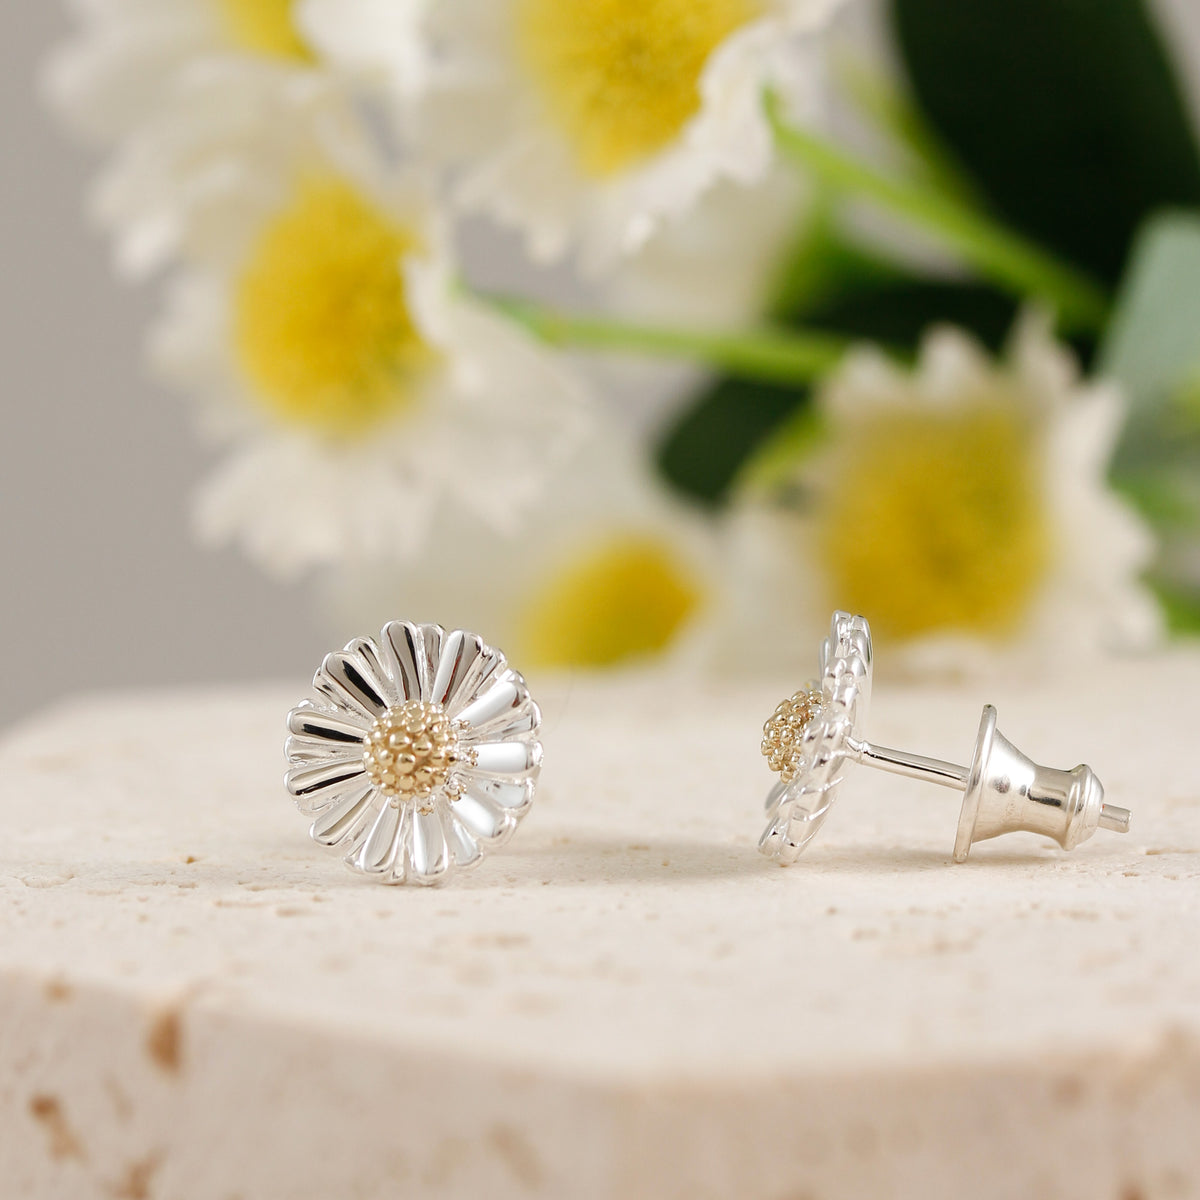 silver daisy flower earrings with solid gold middles